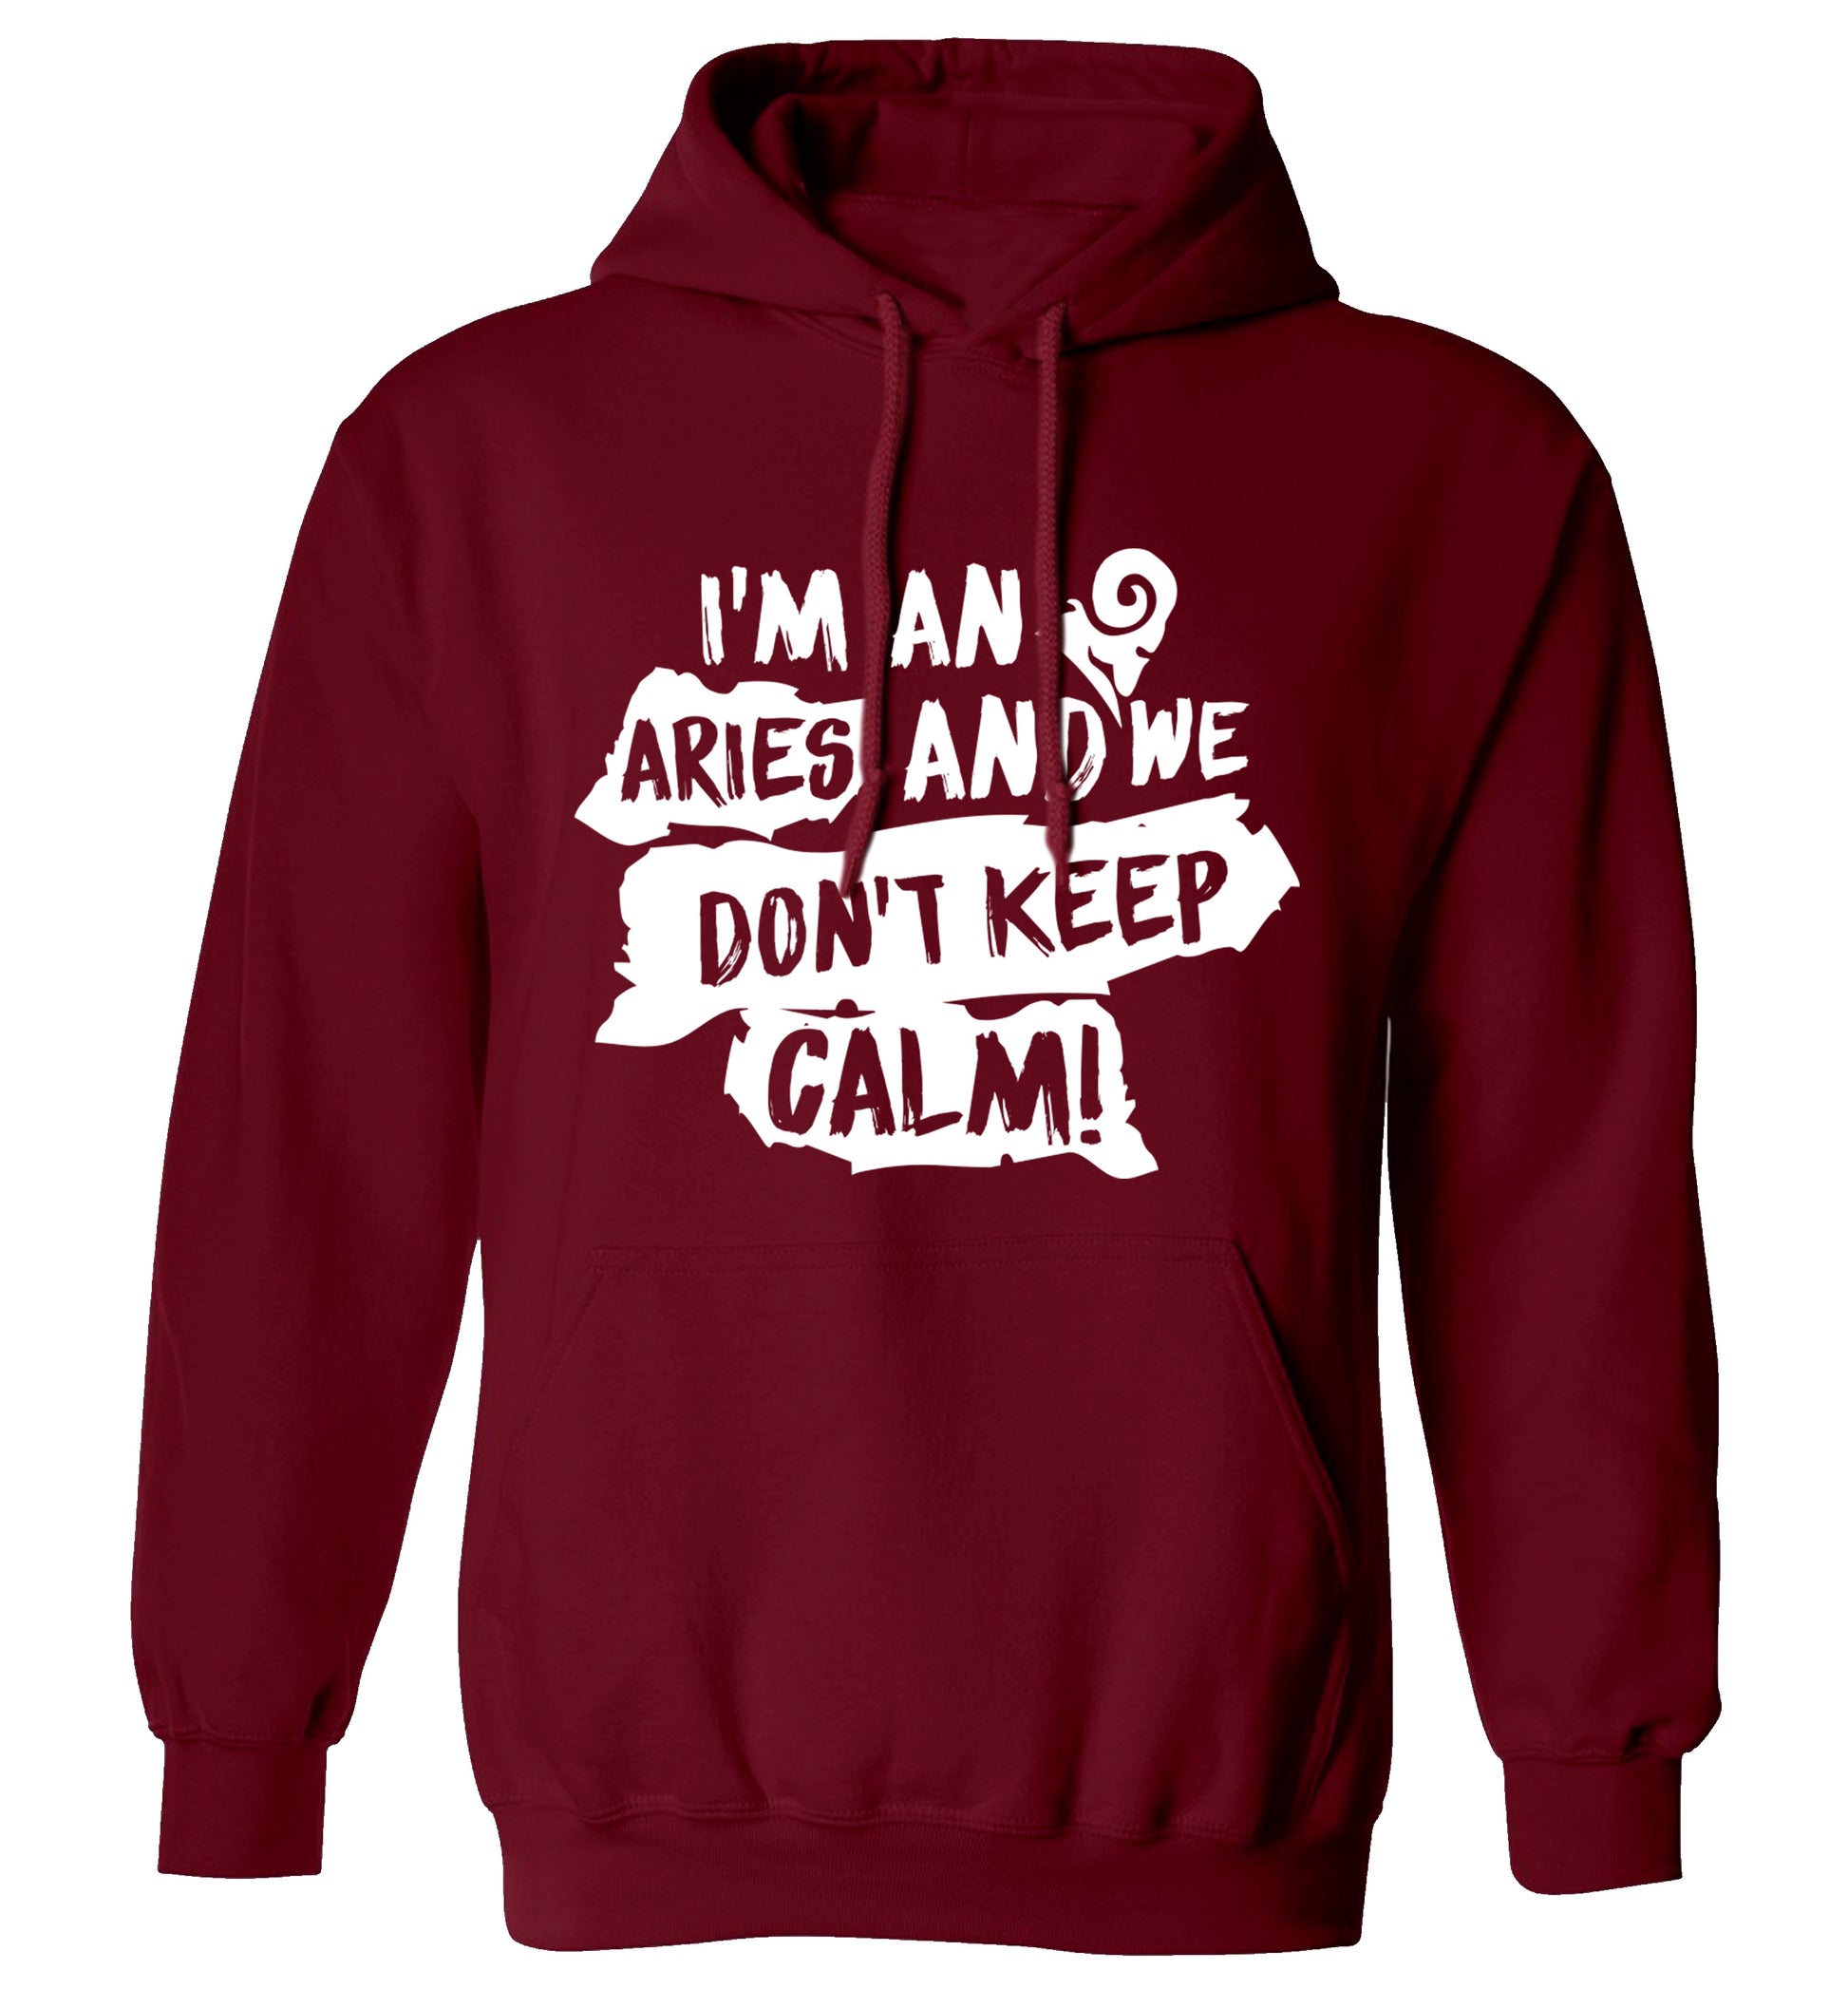 I'm an aries and we don't keep calm adults unisex maroon hoodie 2XL